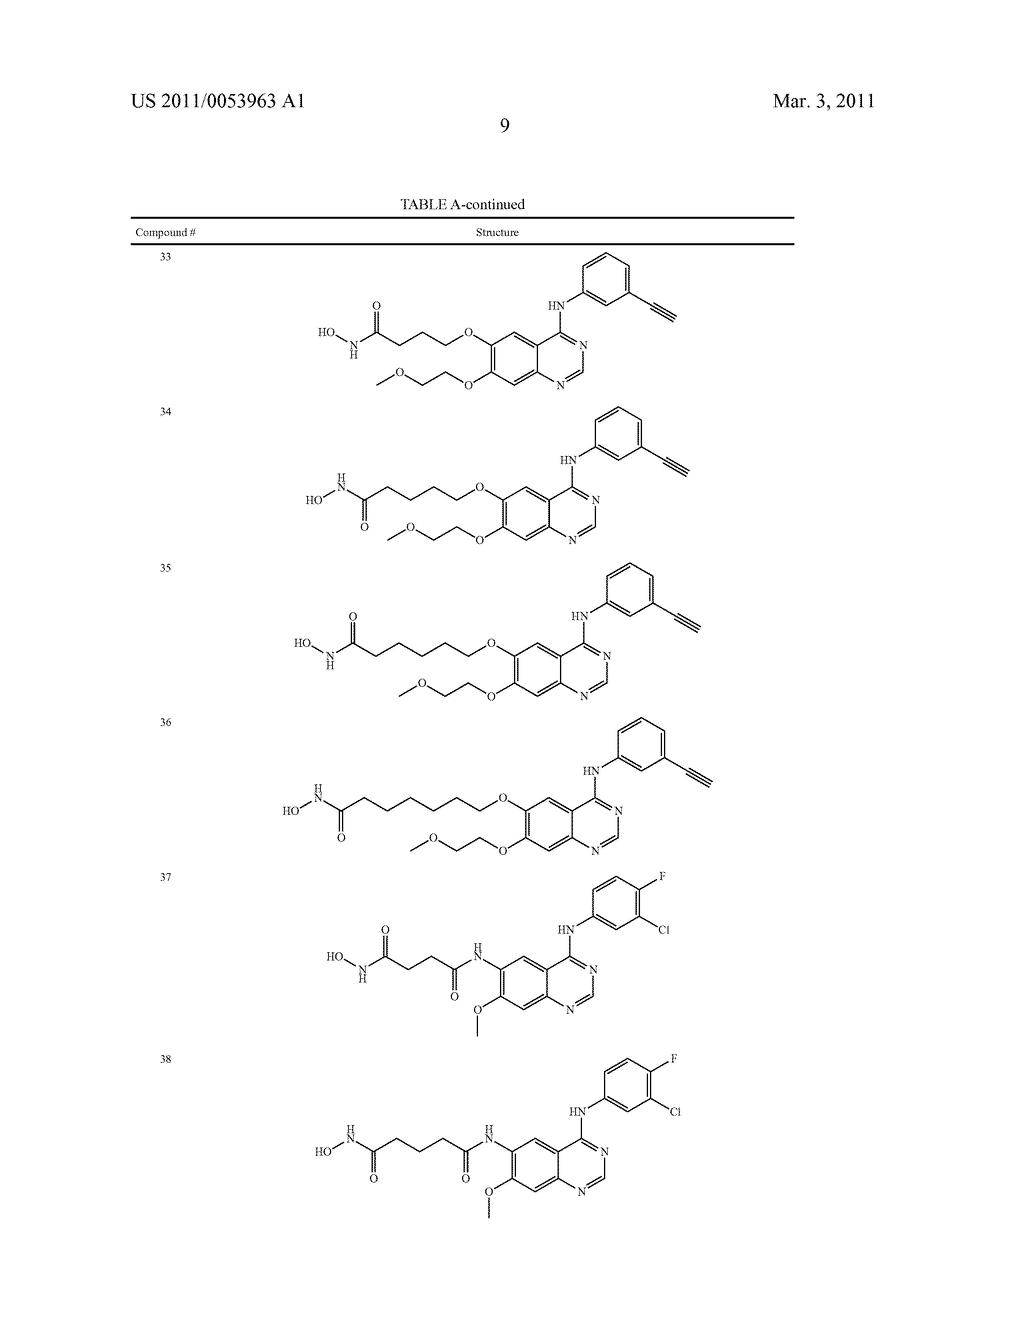 TARTRATE SALTS OF QUINAZOLINE BASED EGFR INHIBITORS CONTAINING A ZINC BINDING MOIETY - diagram, schematic, and image 30